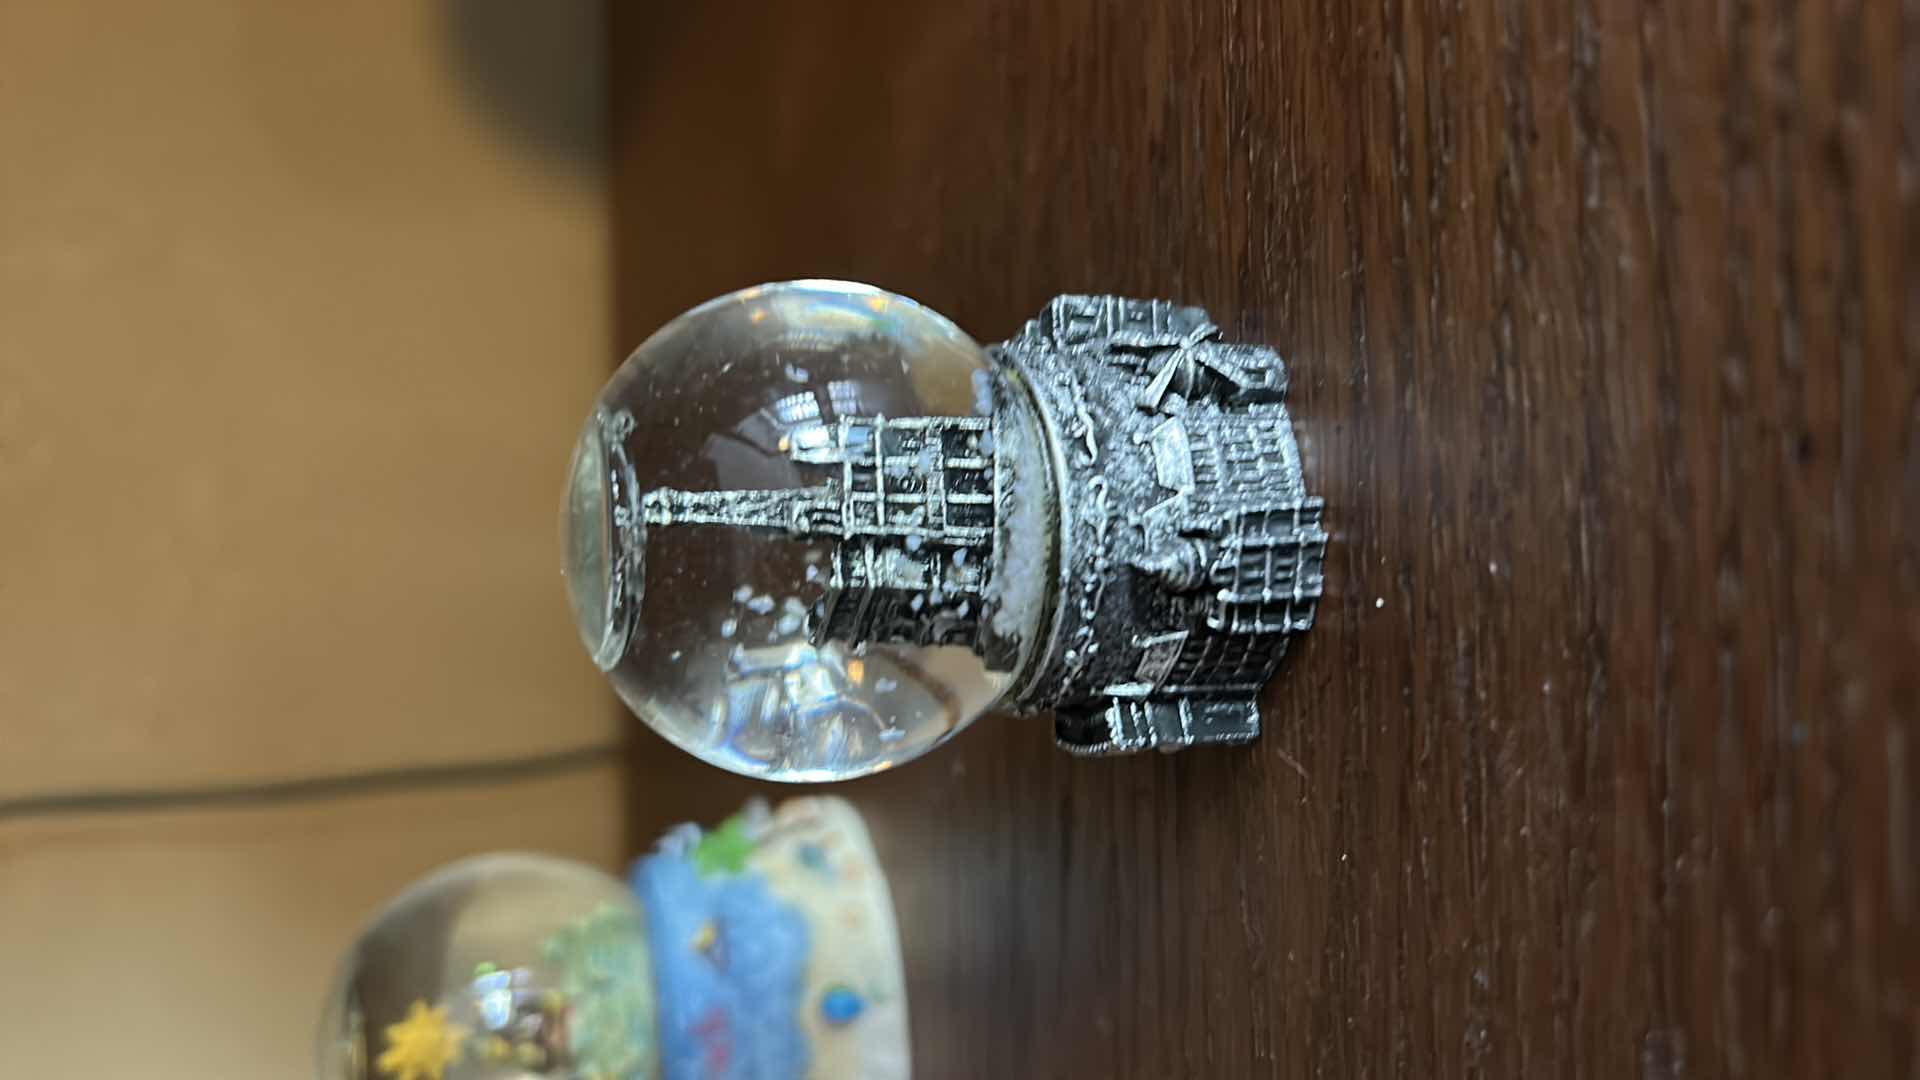 Photo 5 of 5 SNOW GLOBES - SOME MUSICAL